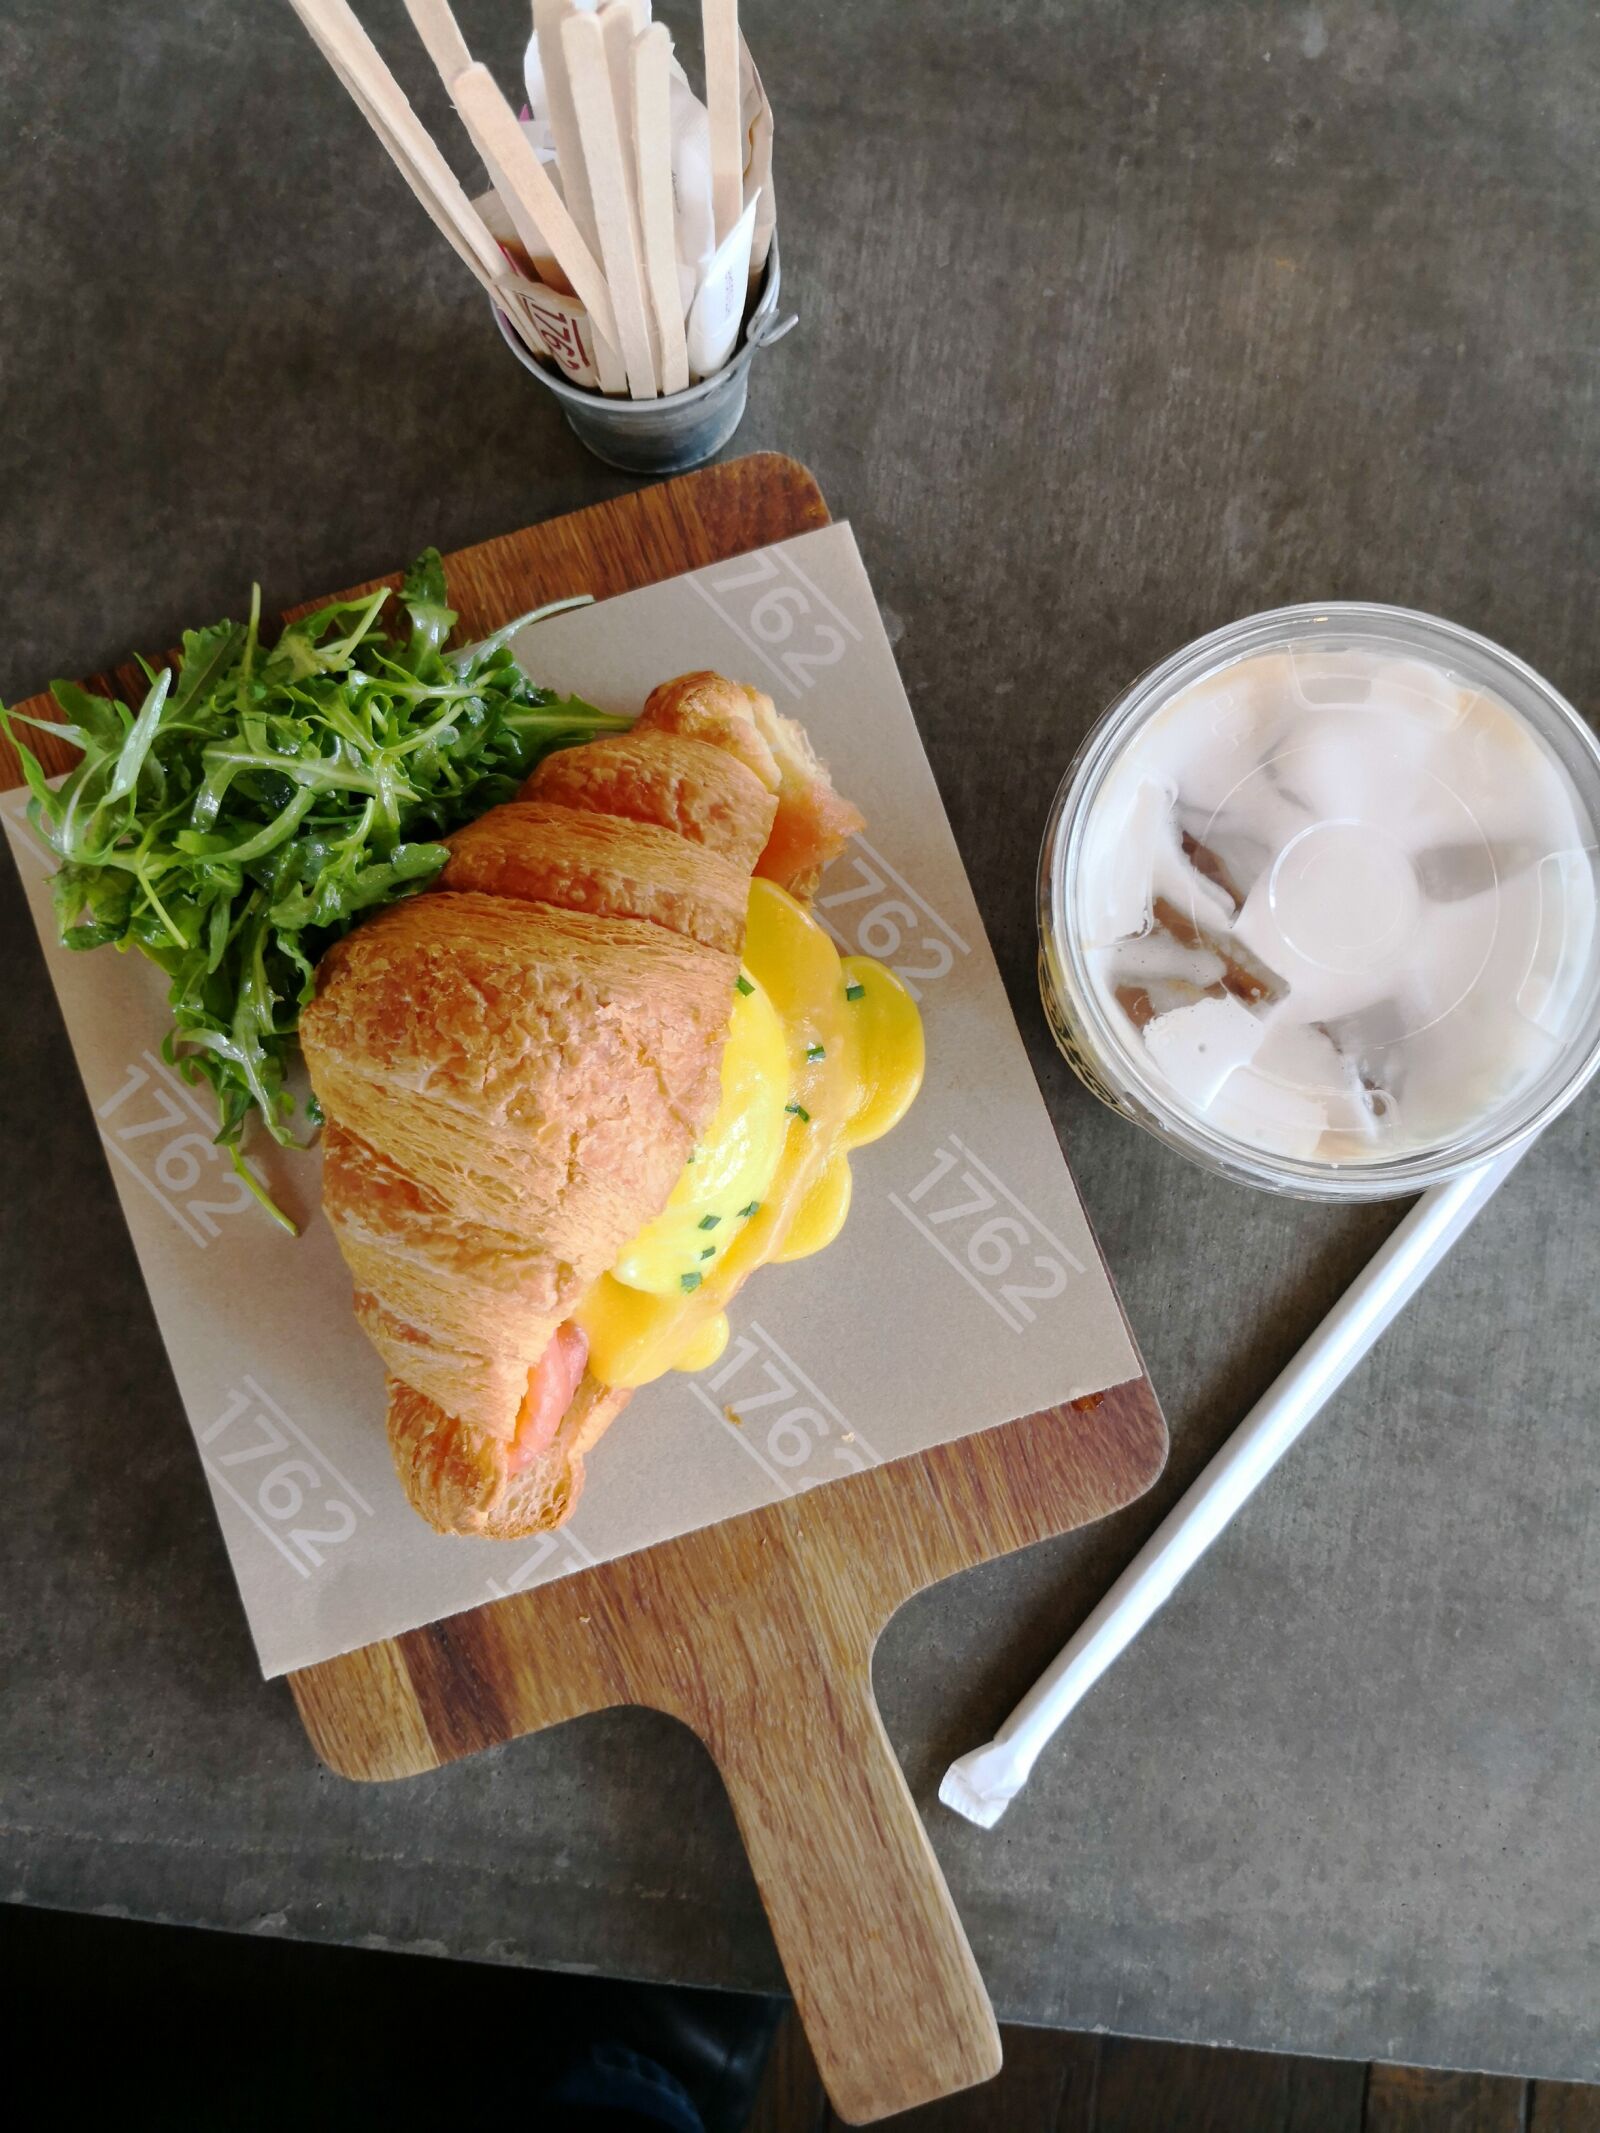 HUAWEI Mate 10 sample photo. Croissant, poached eggs, lunch photography